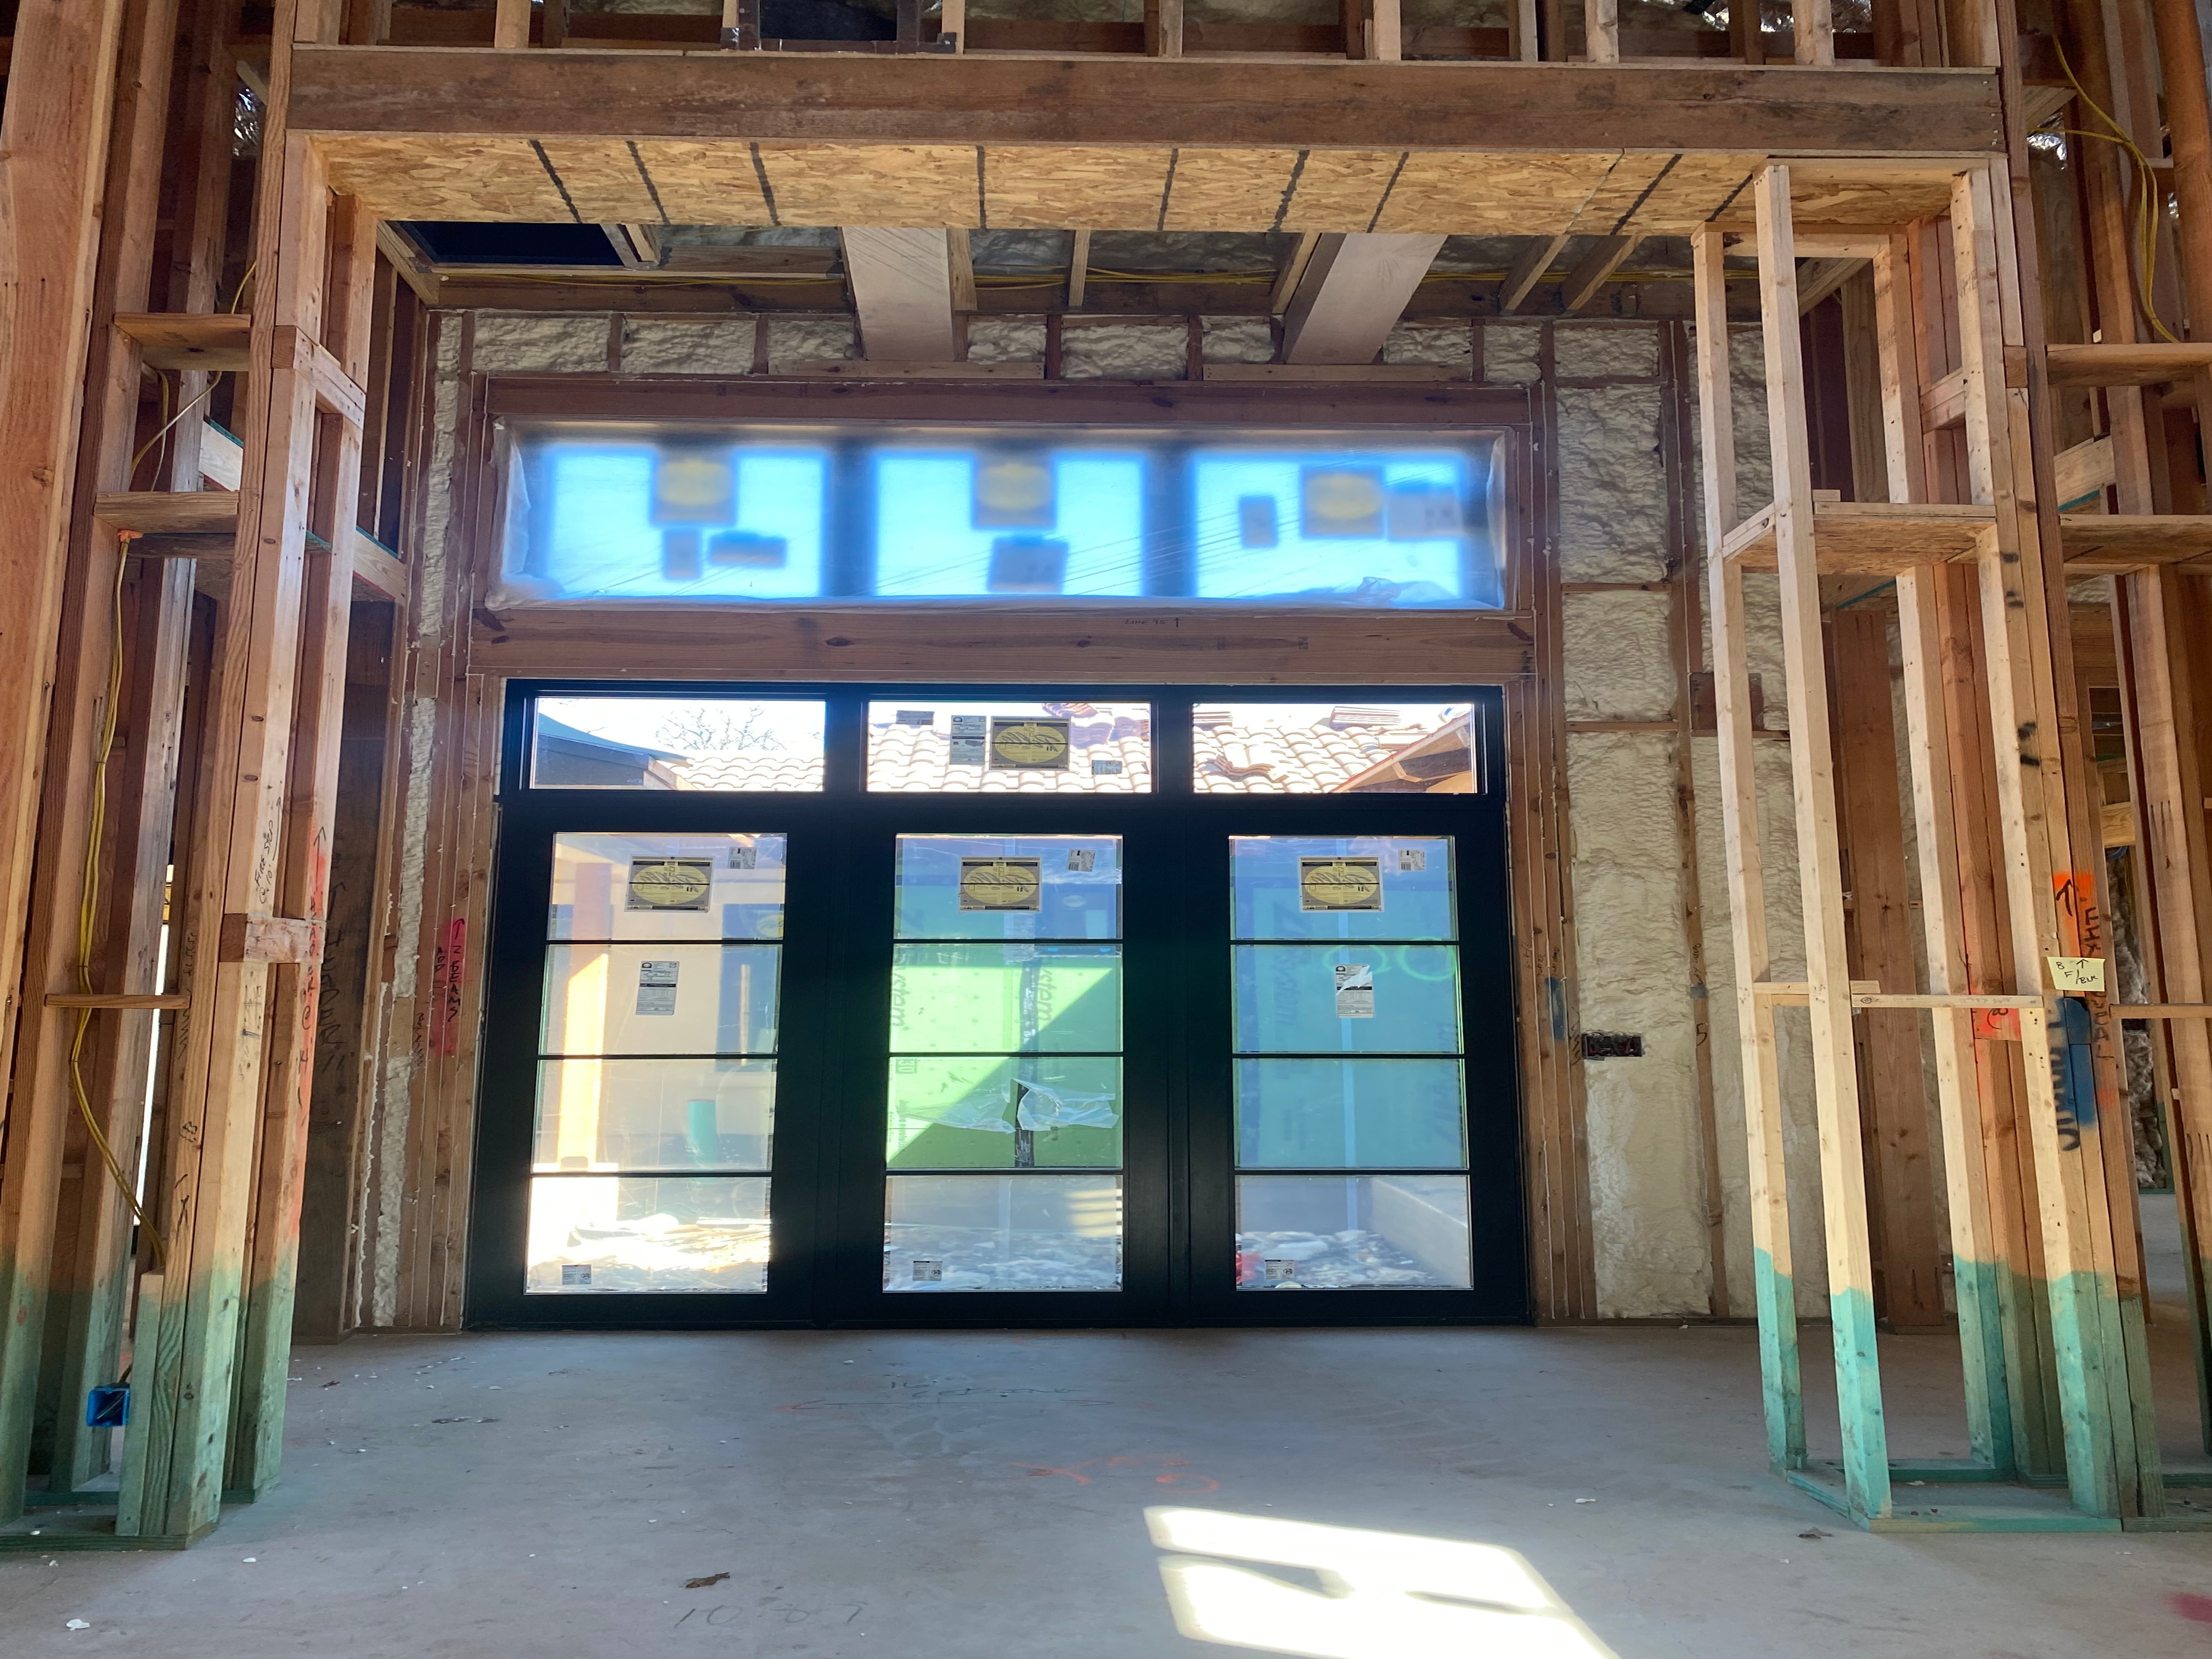 Hinged patio doors and awning windows on new construction in Austin